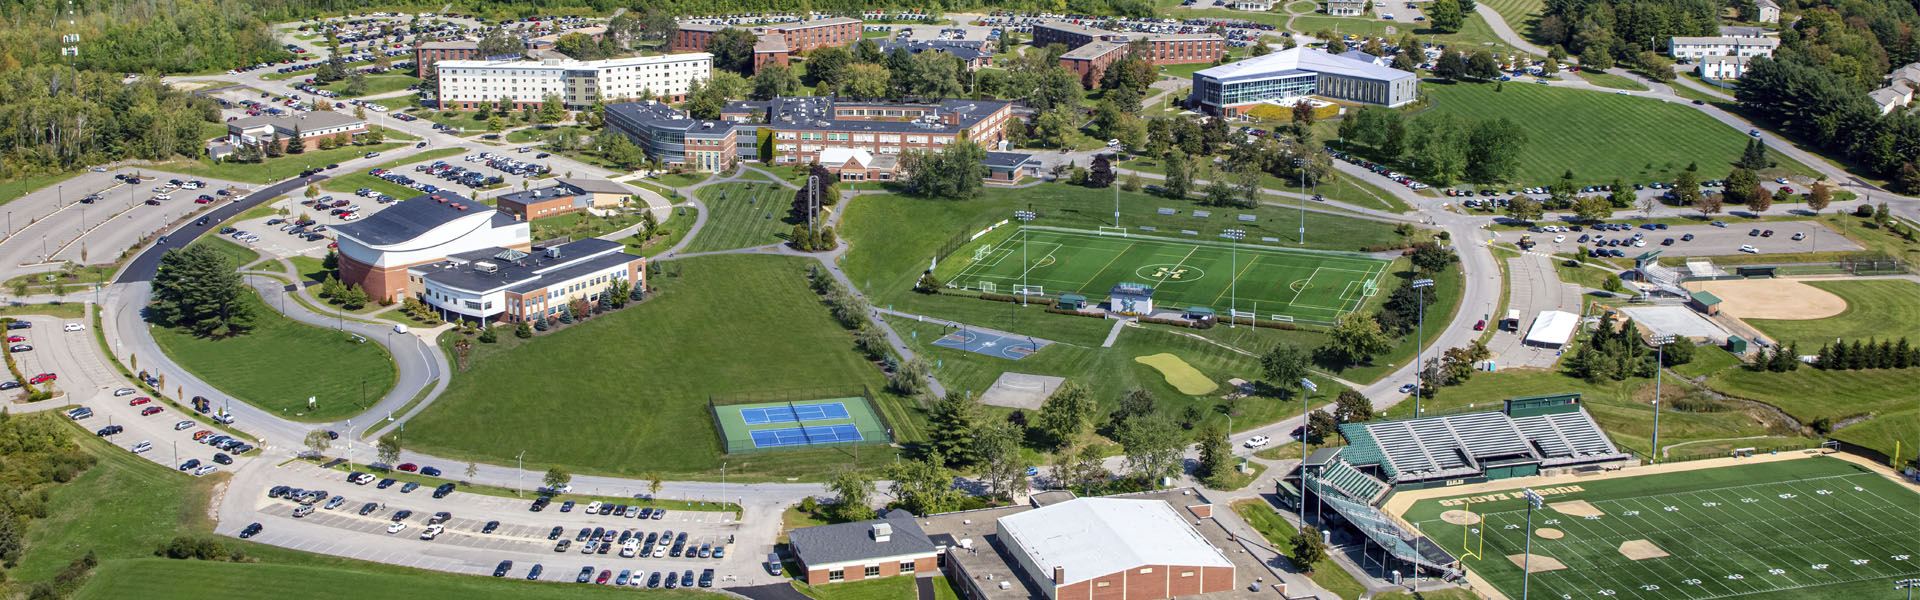 An aerial picture of the Husson University campus